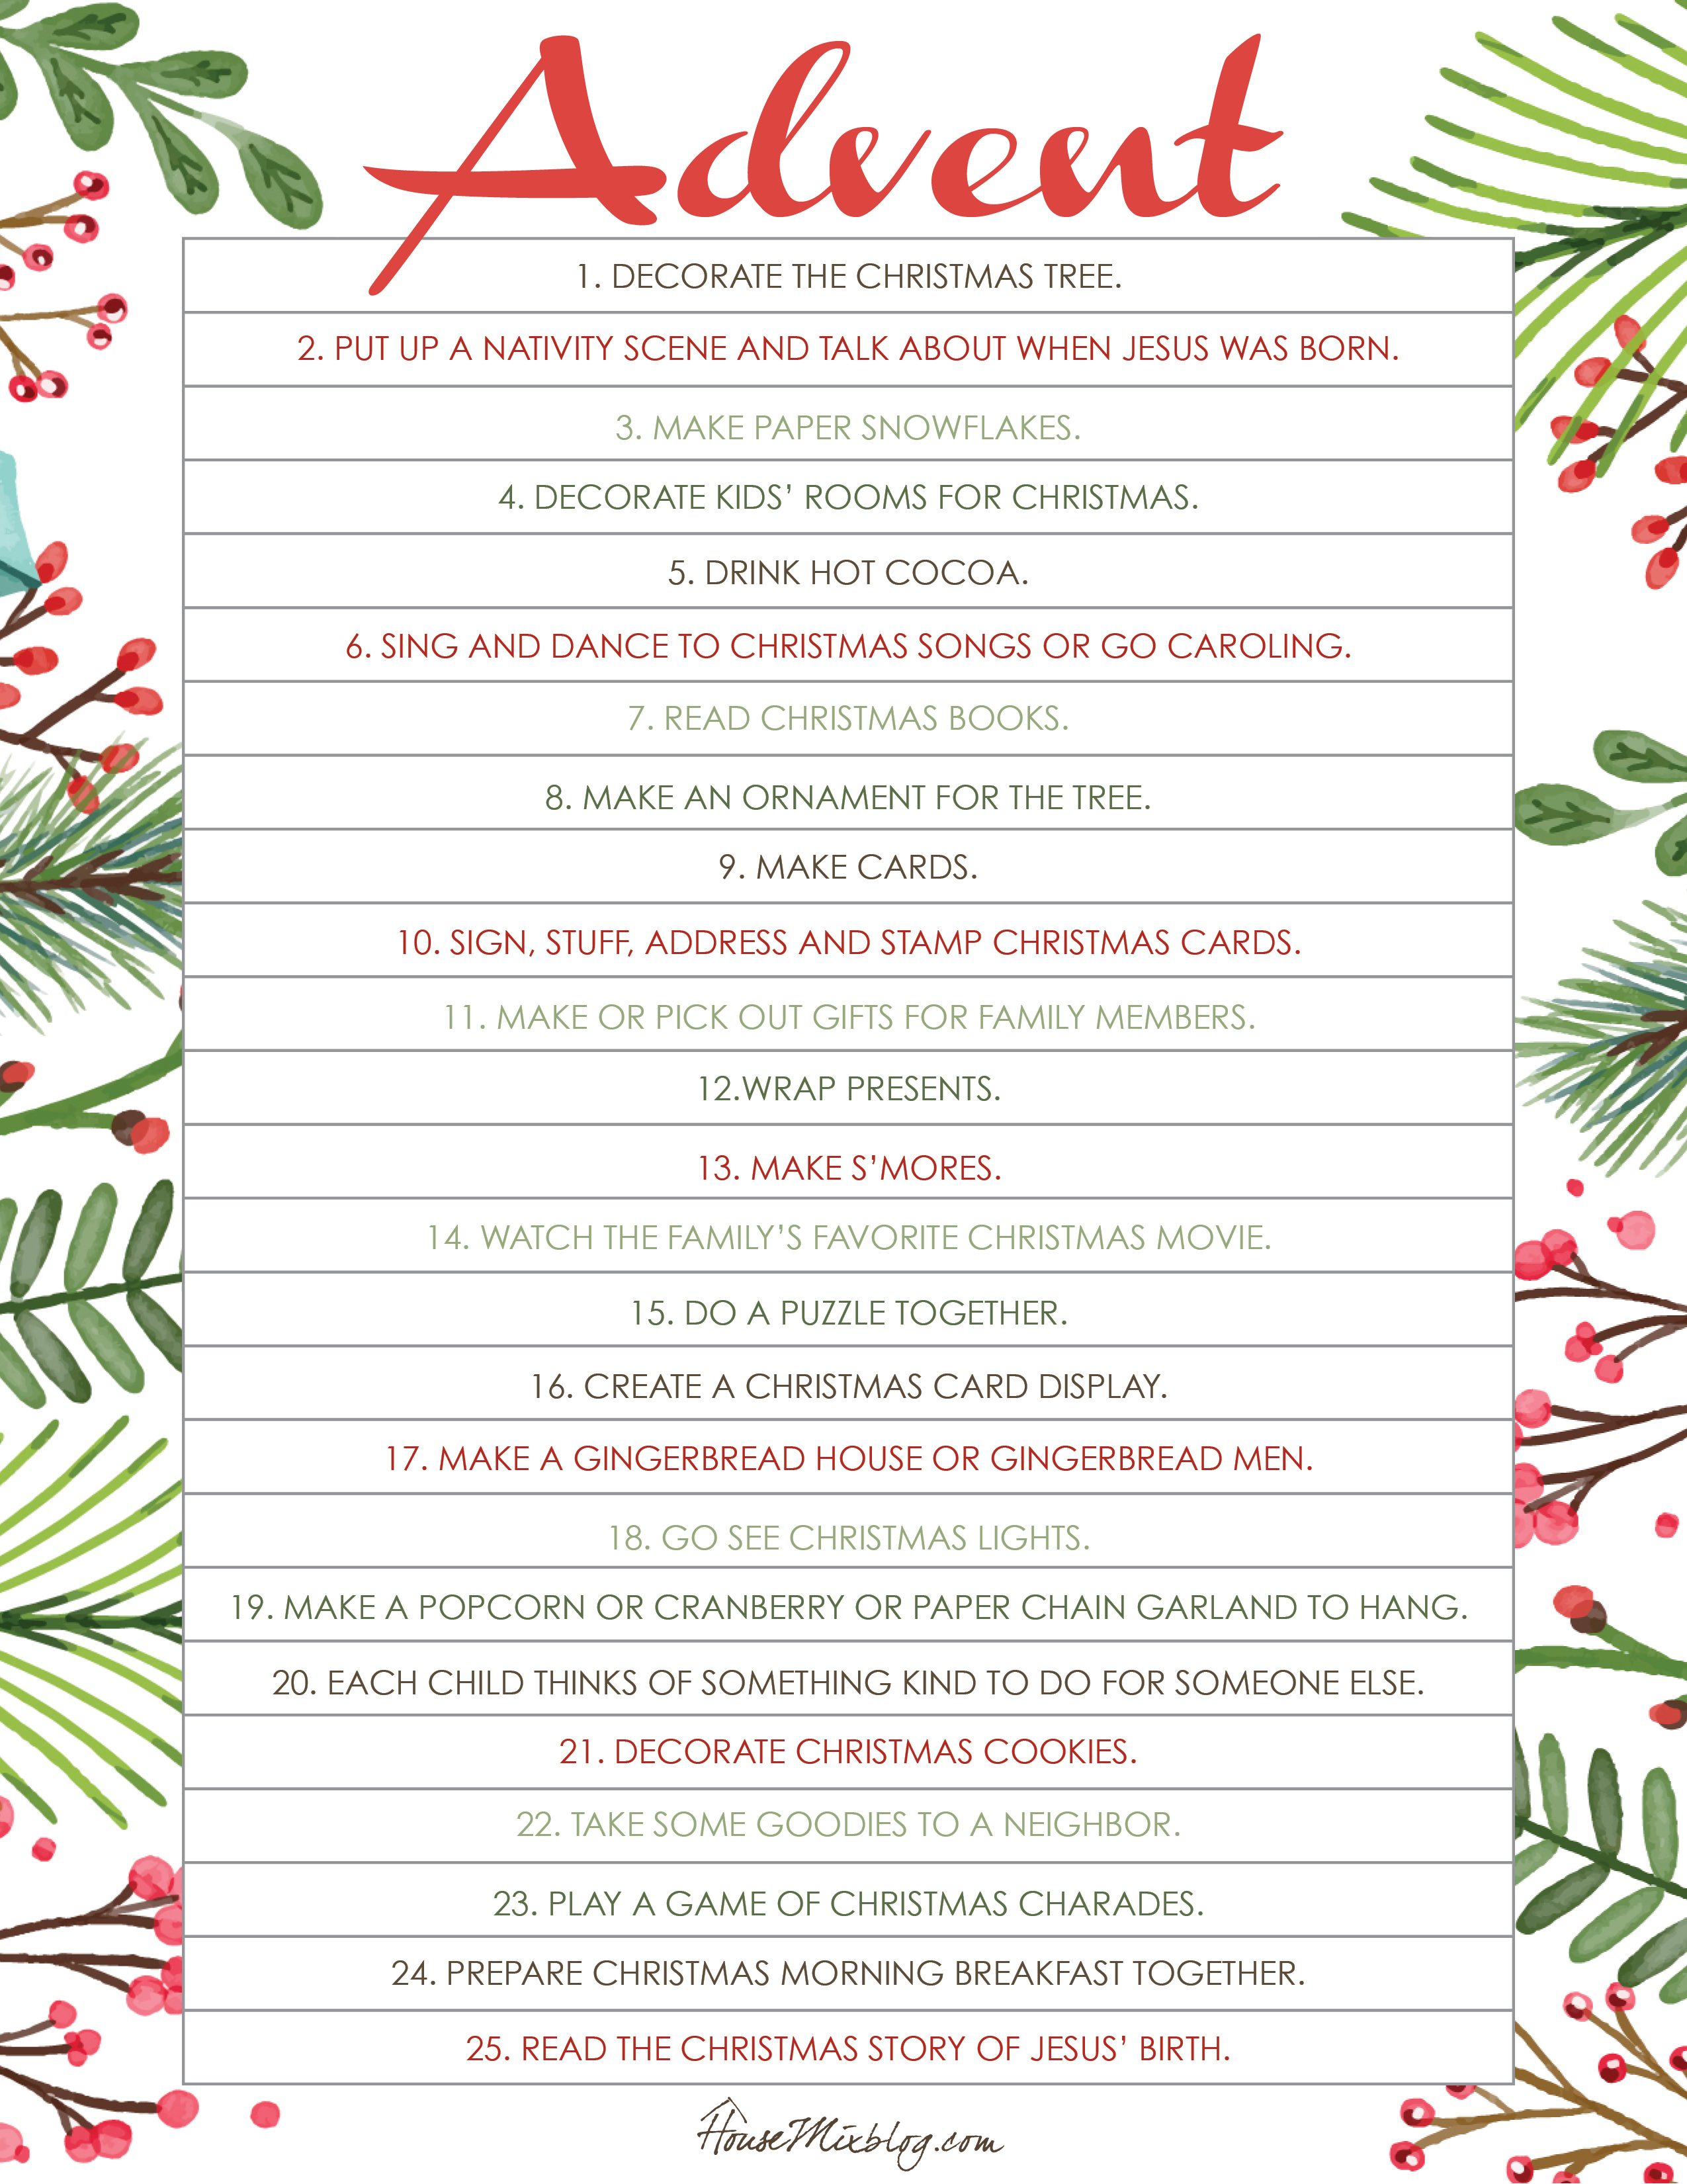 Printable Christmas Activities For Advent | House Mix - Printable Advent Puzzle